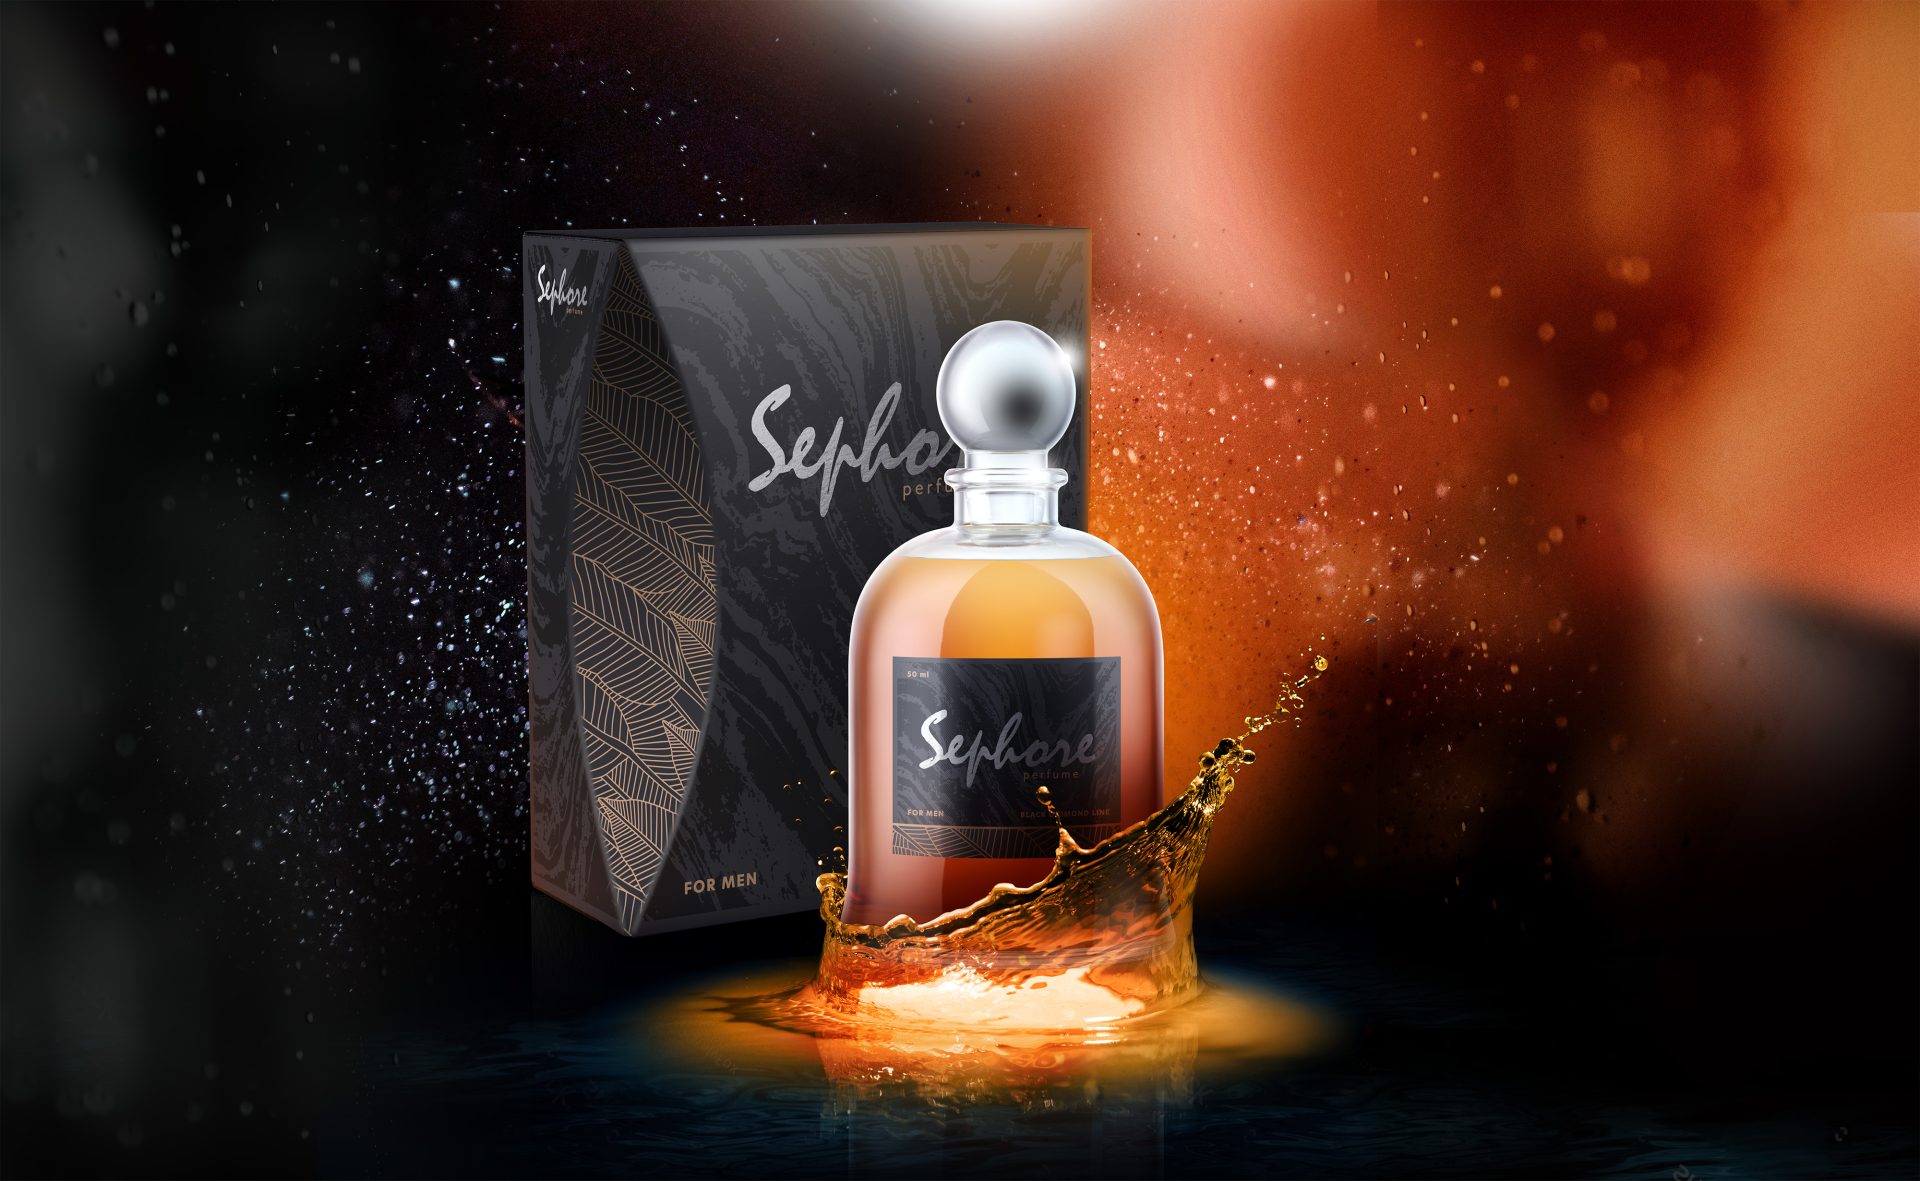 Sephore – An original fragrance in a special edition.